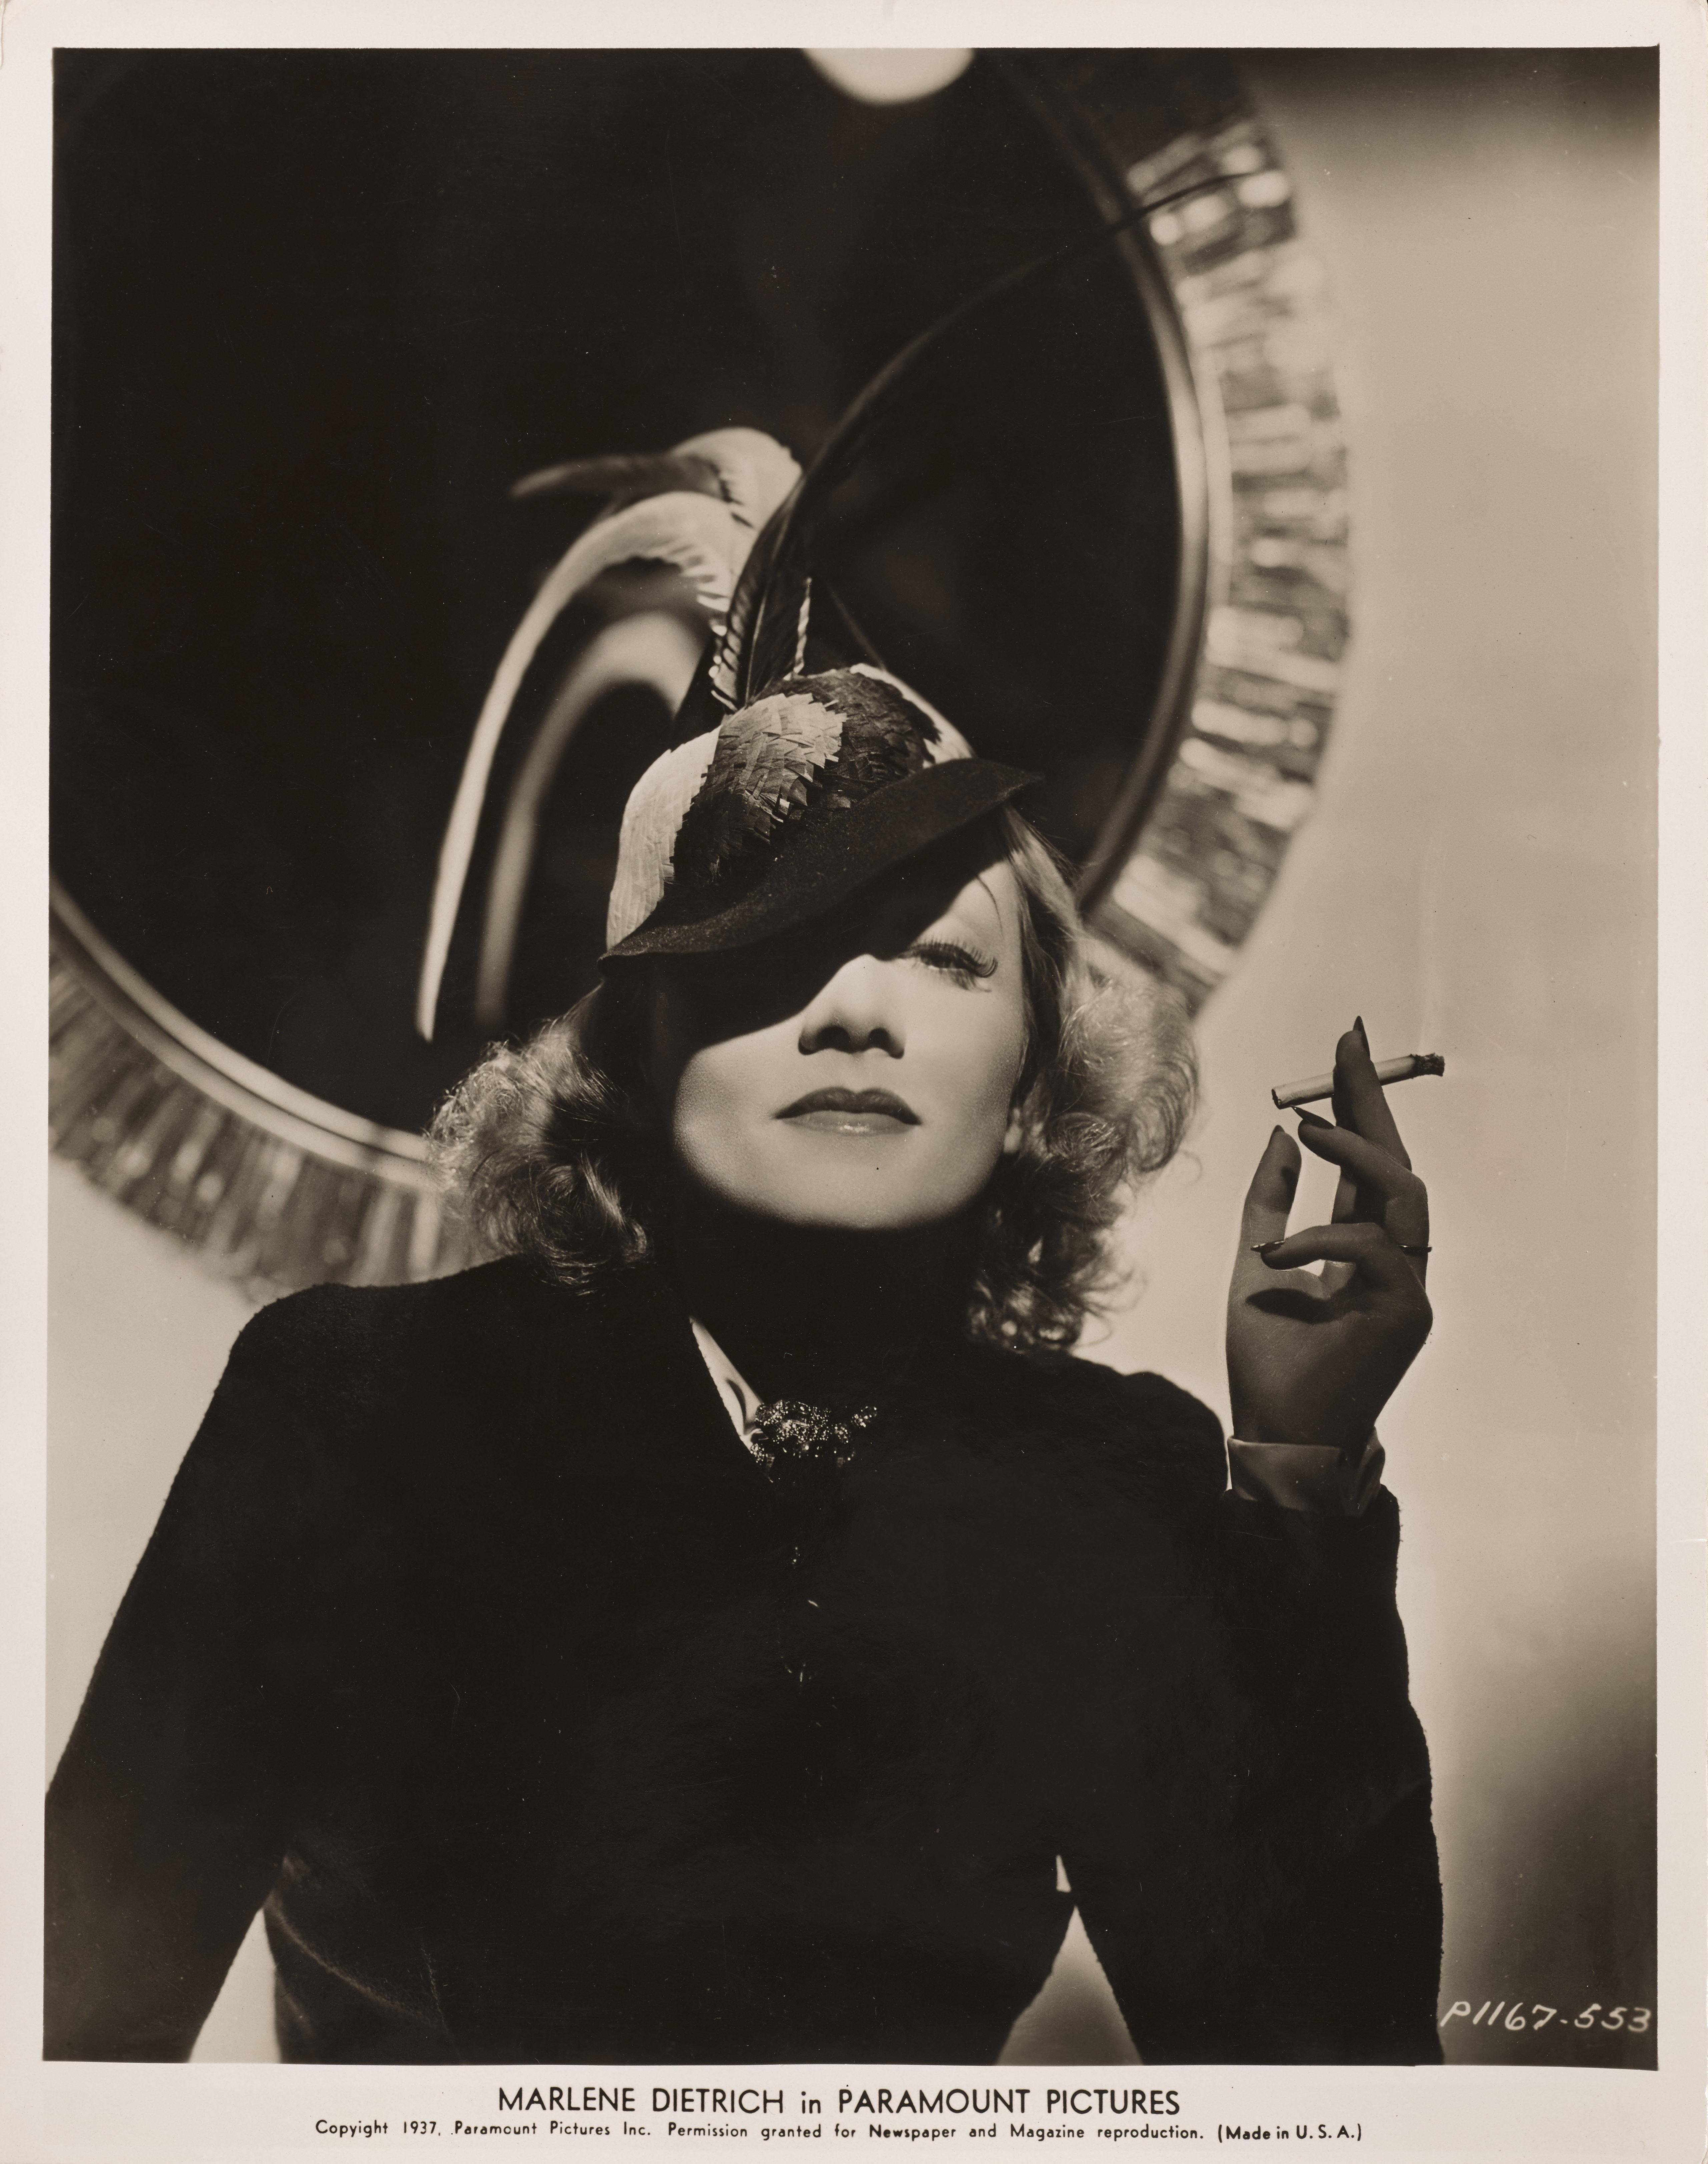 Original US photographic black and white production still for the 1937 film Angel, starring Marlene Dietrich, Herbert Marshall, Melvyn the film was directed by Ernst Lubitsch.
This piece would be packed and sent out flat in strong card.